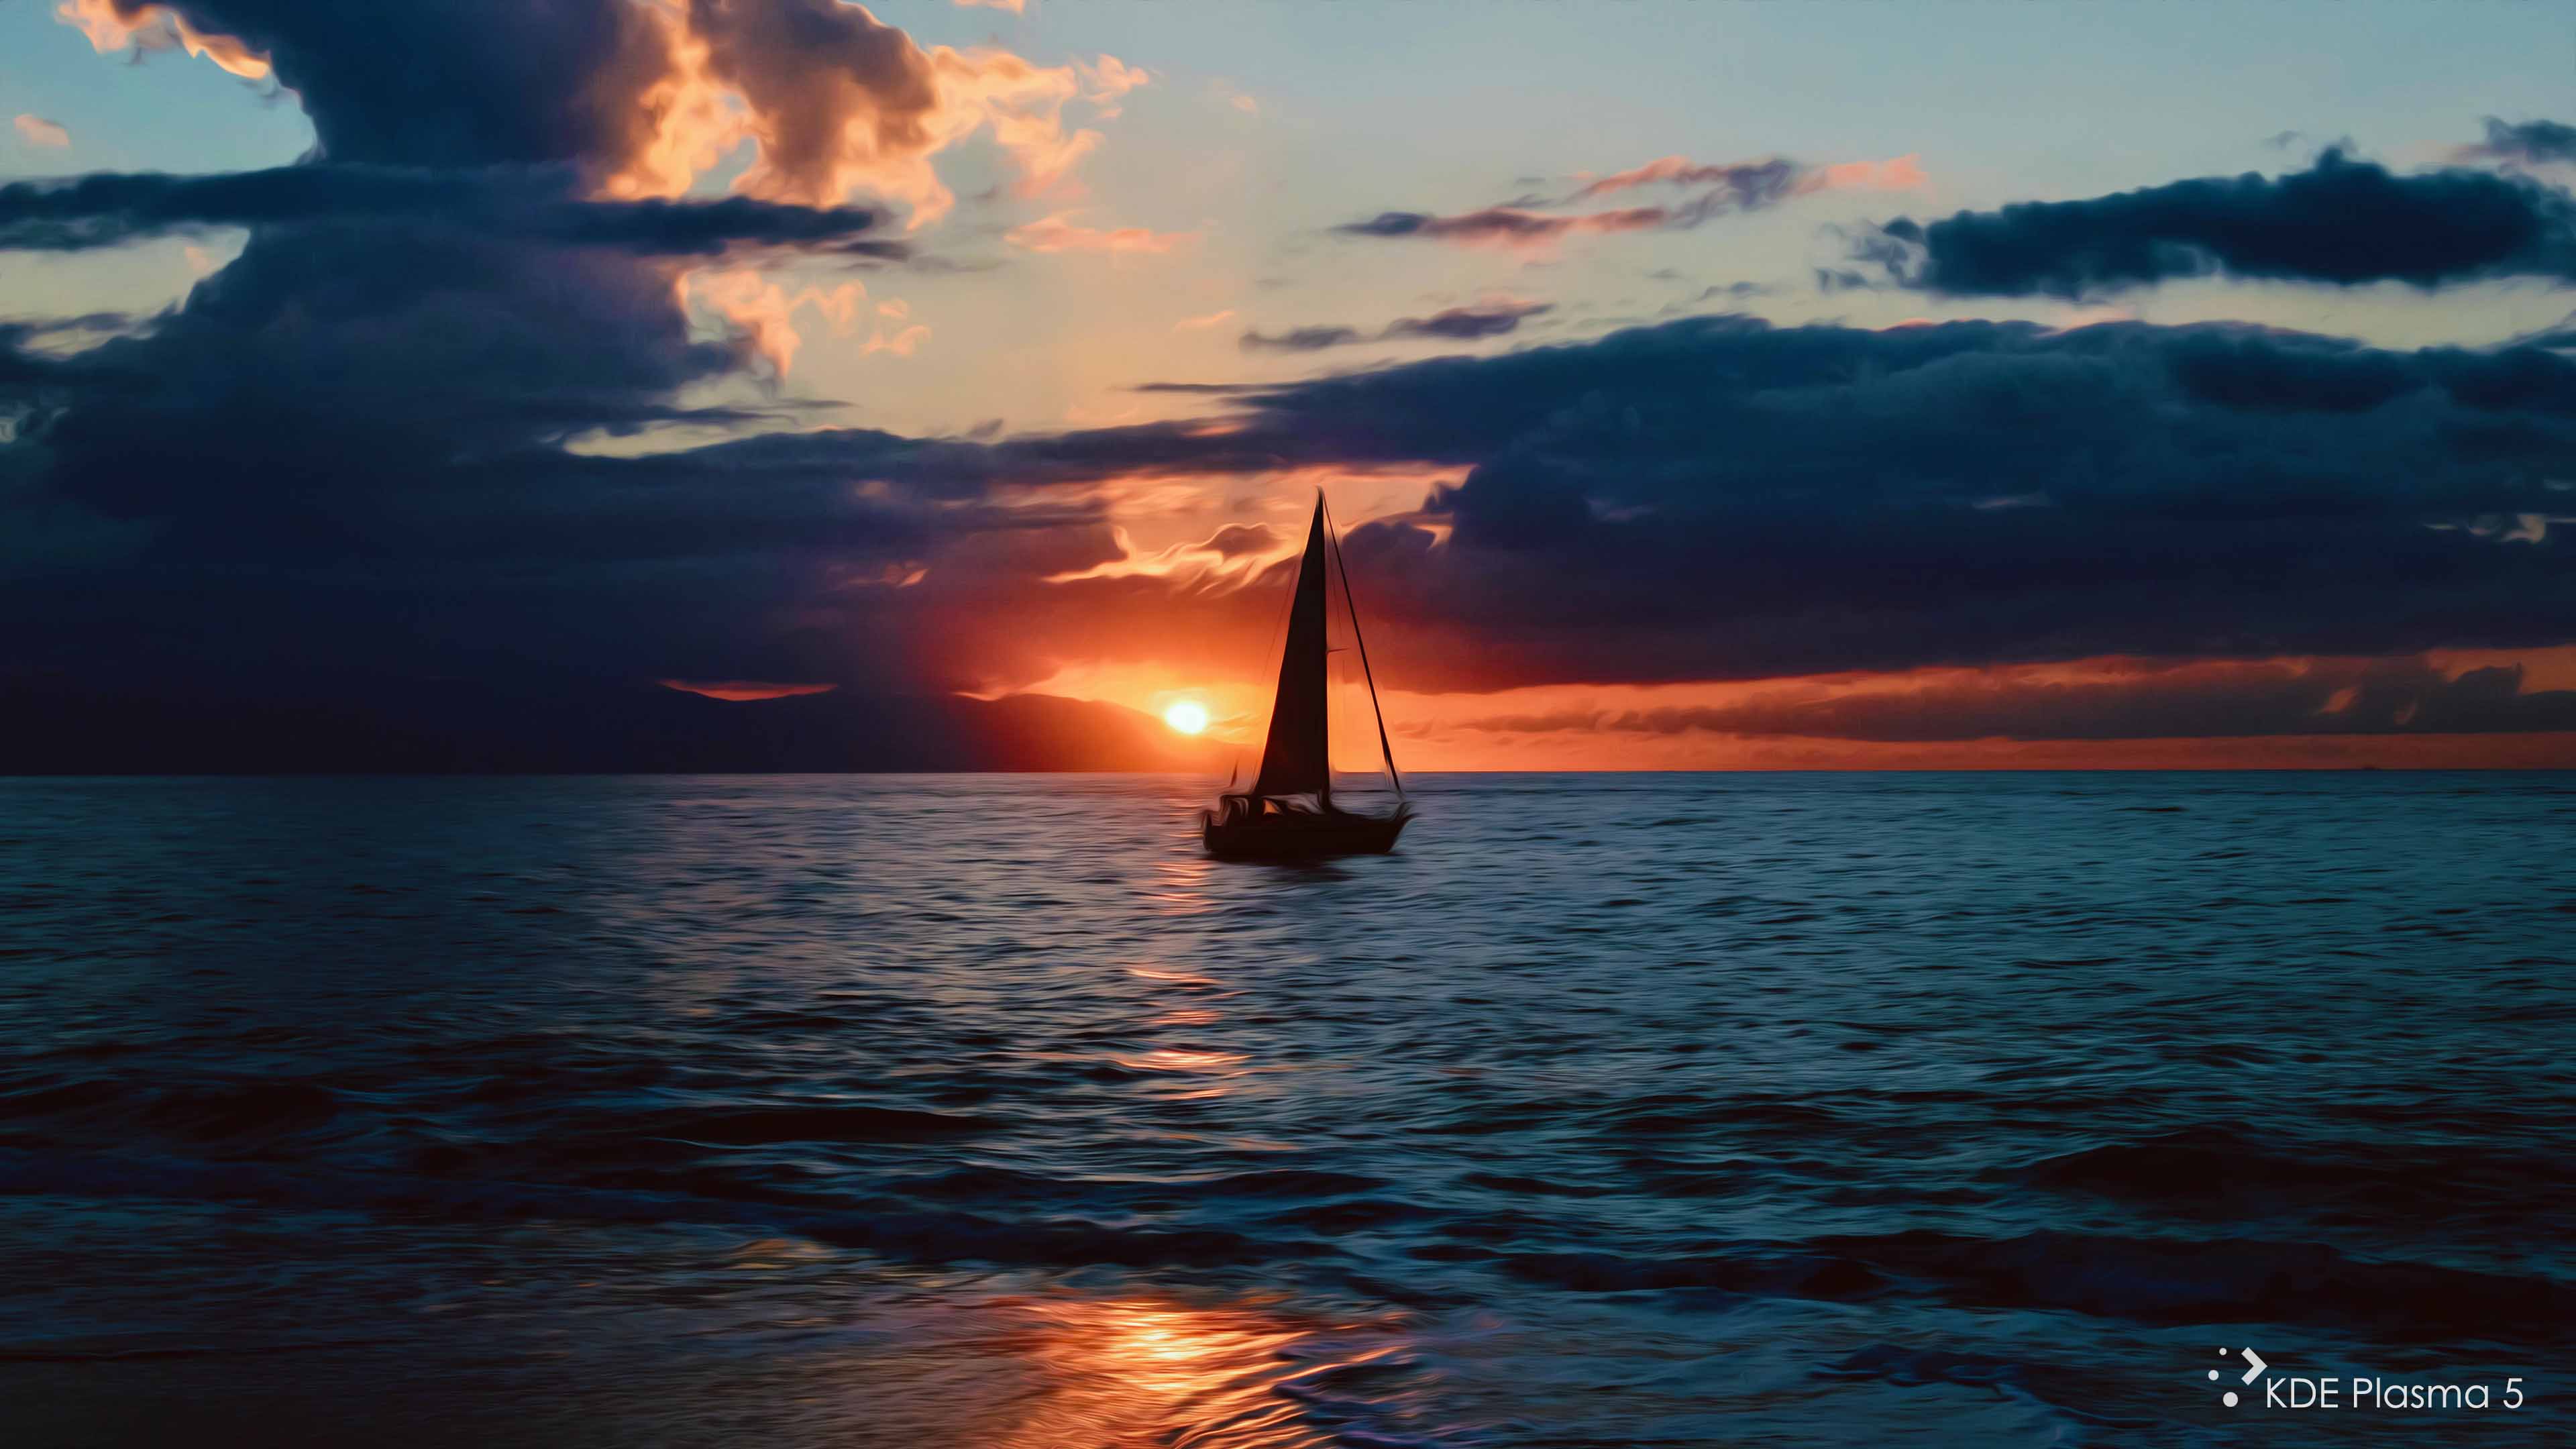 Sailboat on Sea During Sunset Oil Painting 4K Wallpaper